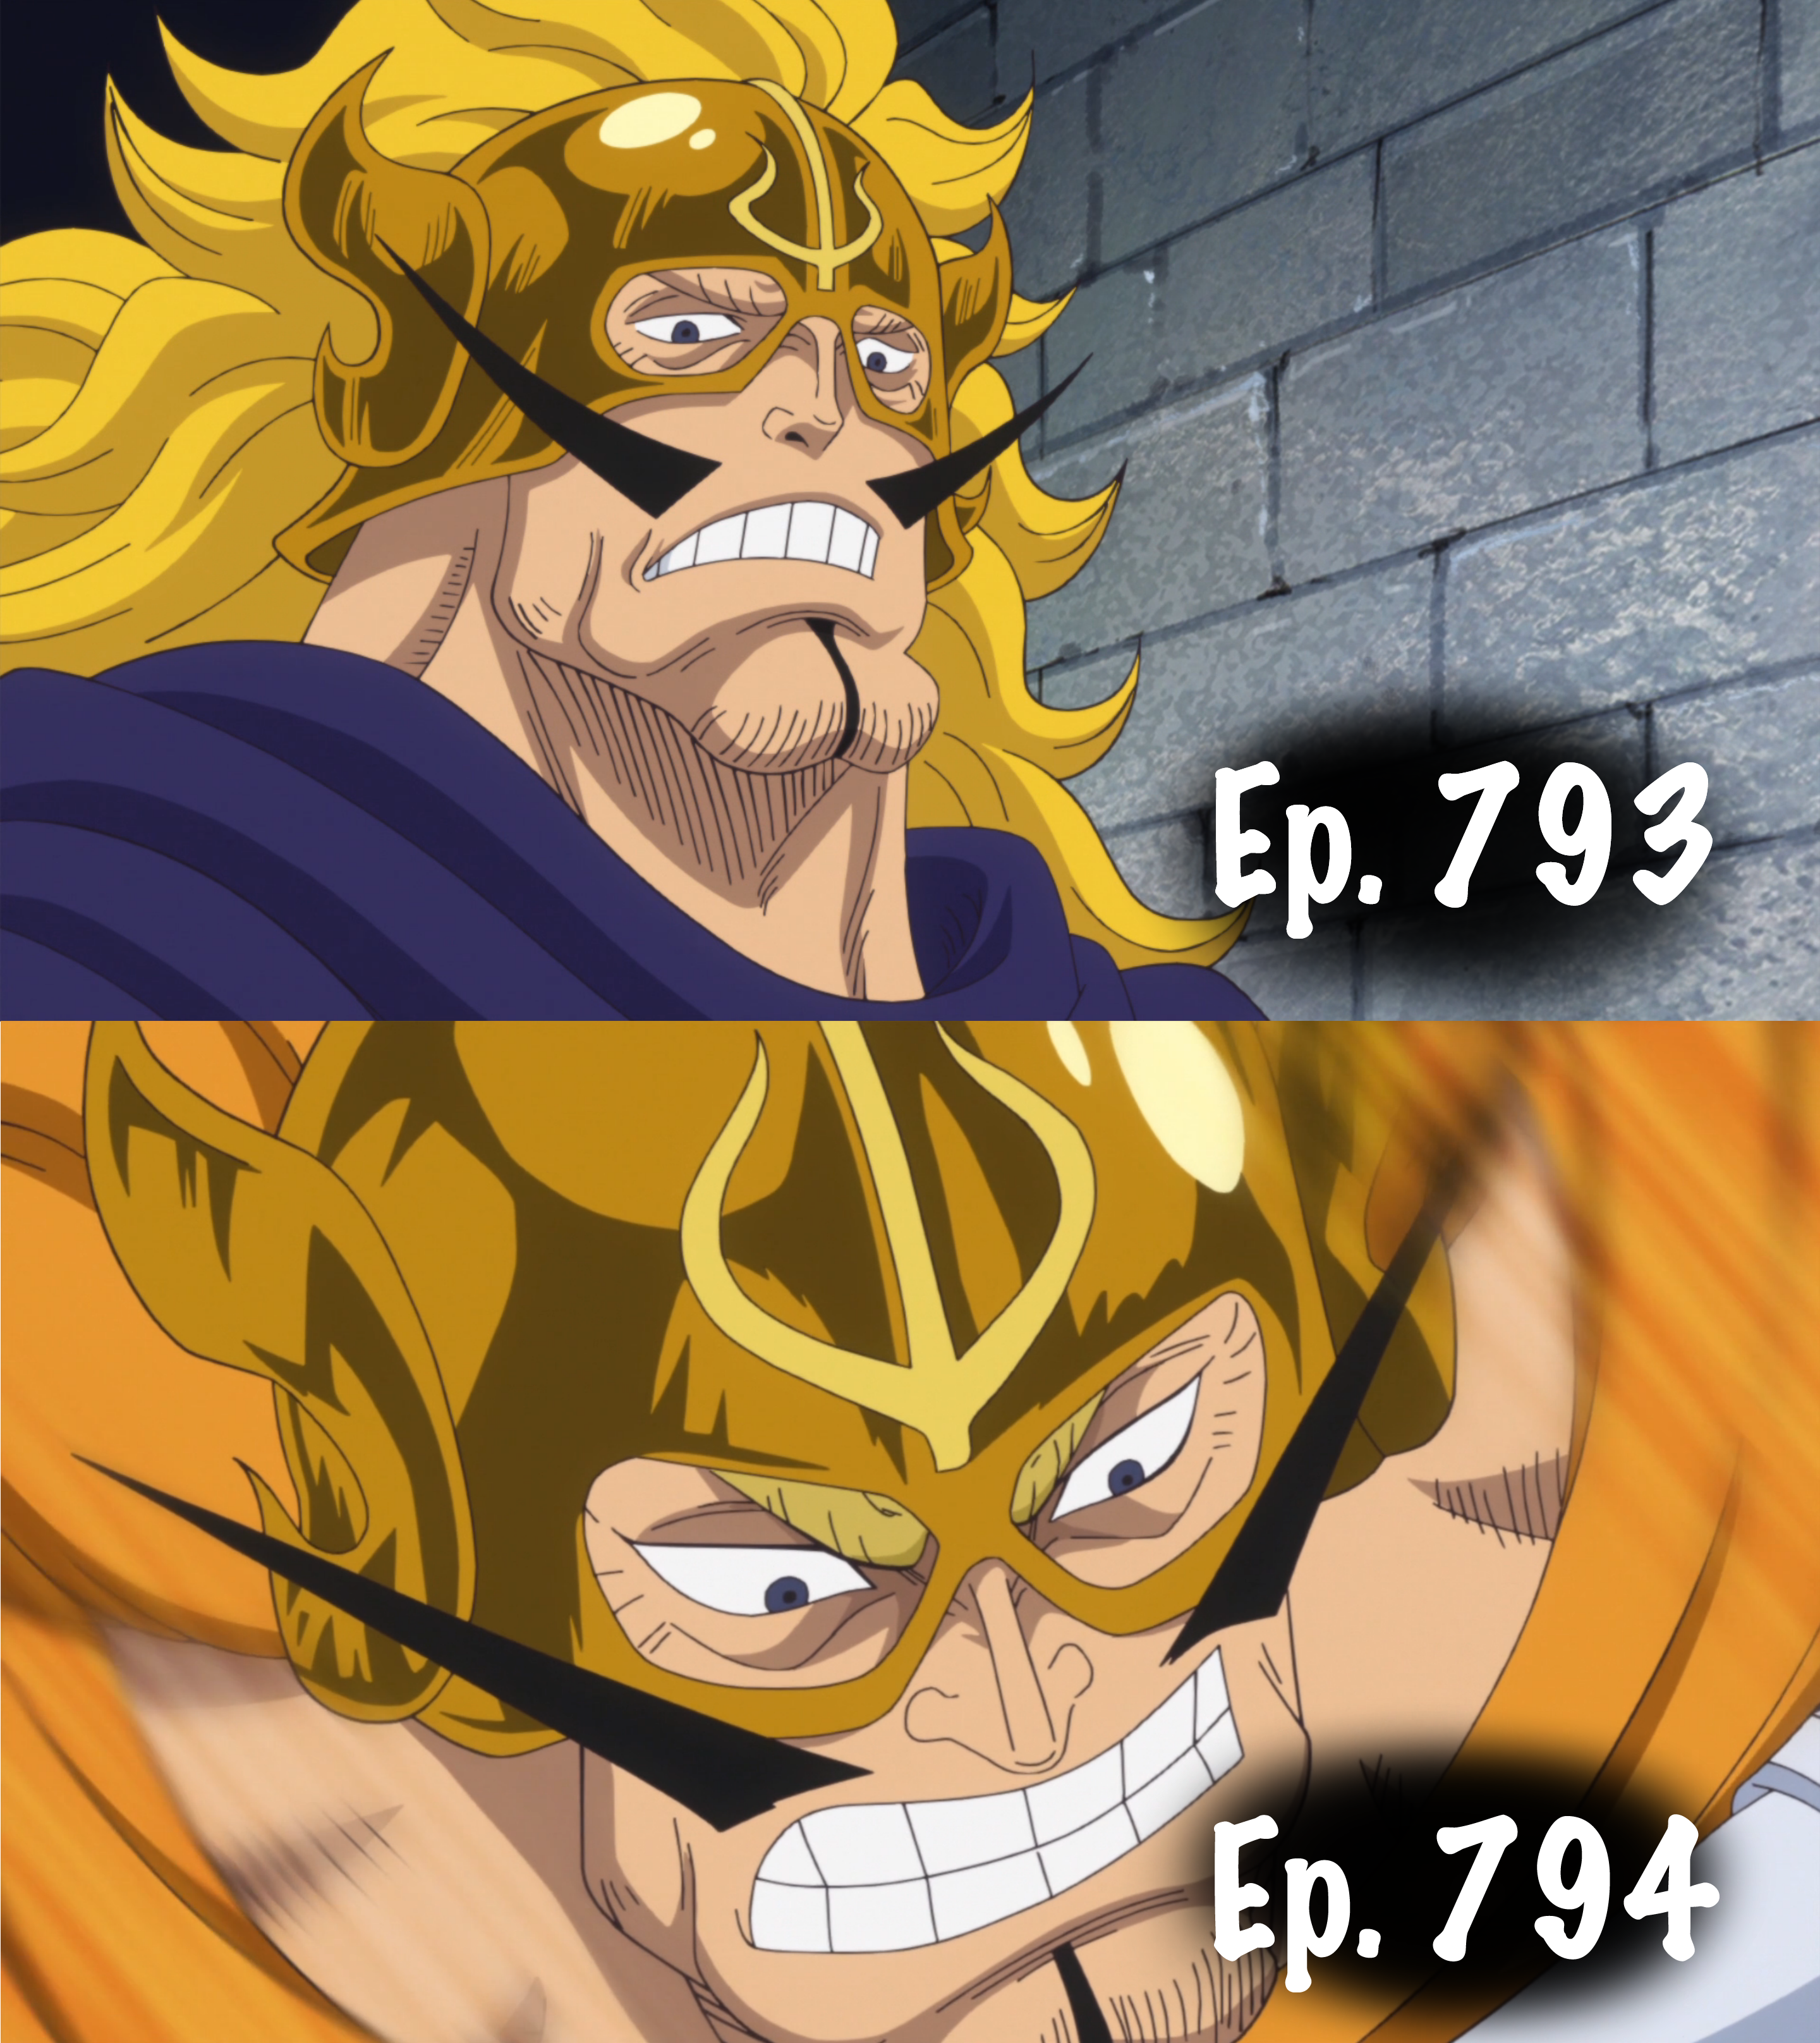 Episode 794 One Piece Anime News Network